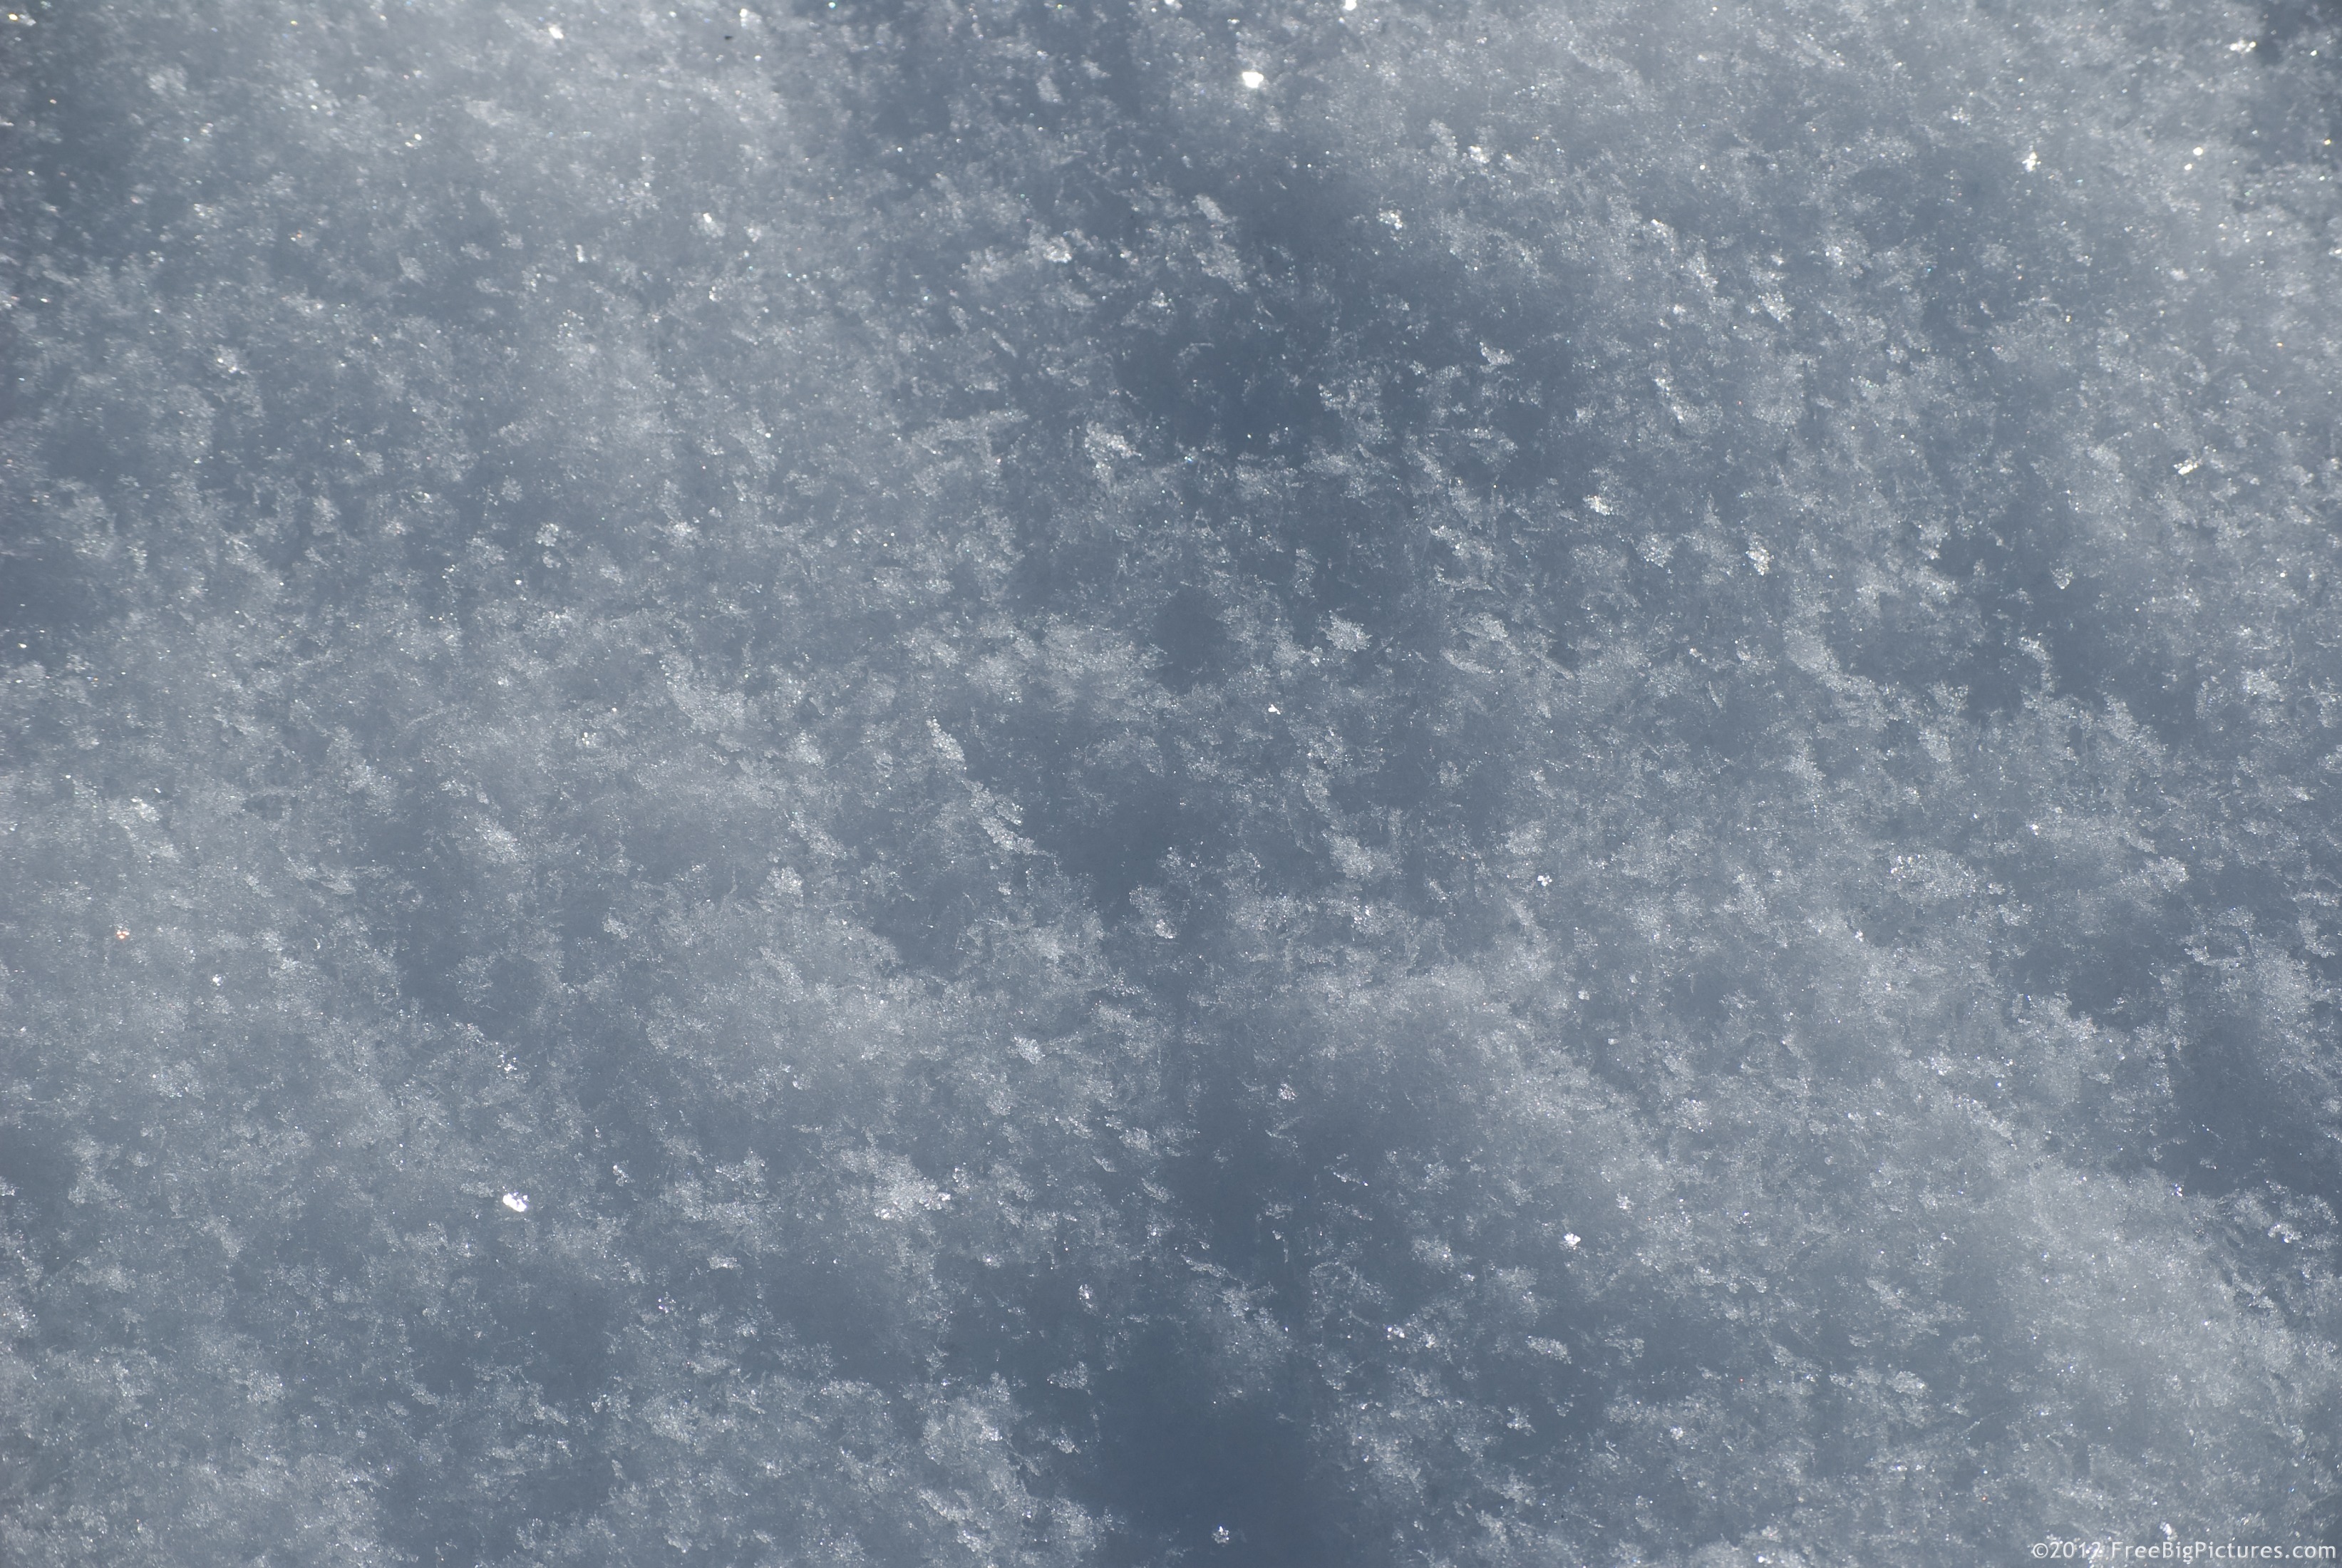 Background With Light And Shaded Portions On Snow